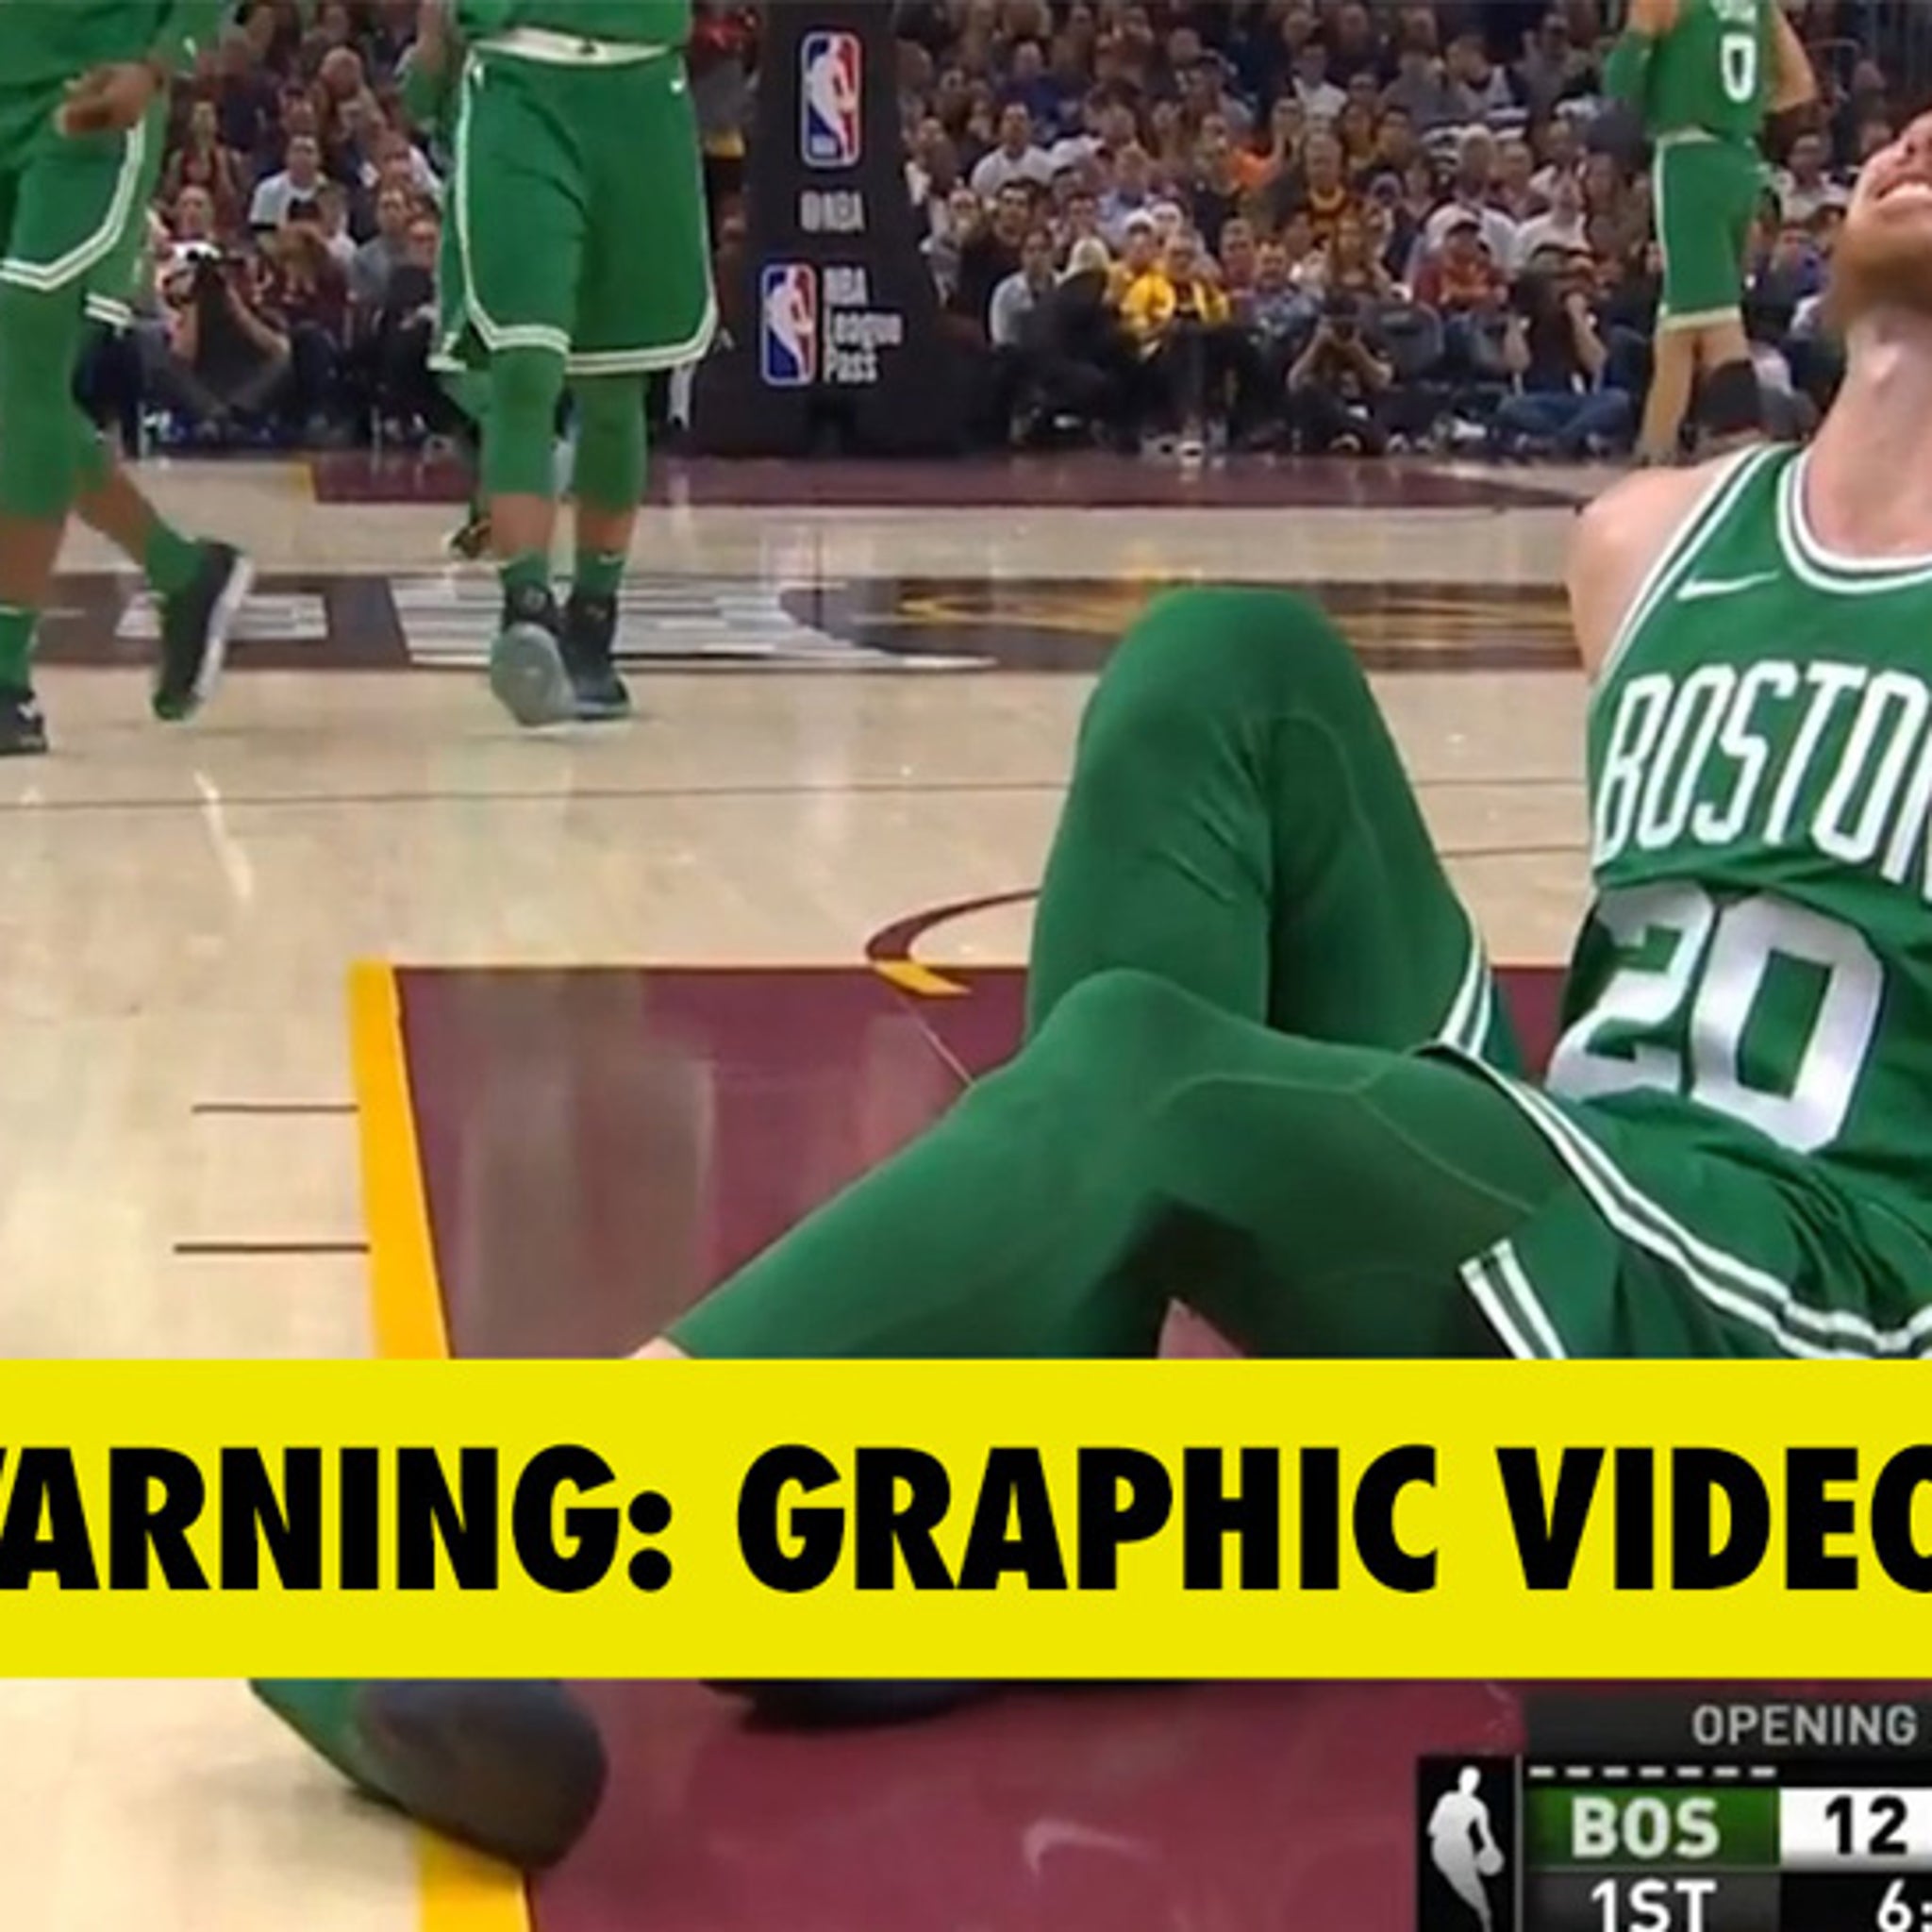 Gordon Hayward Fractures Ankle, Leg vs. Cavaliers, Stretchered off